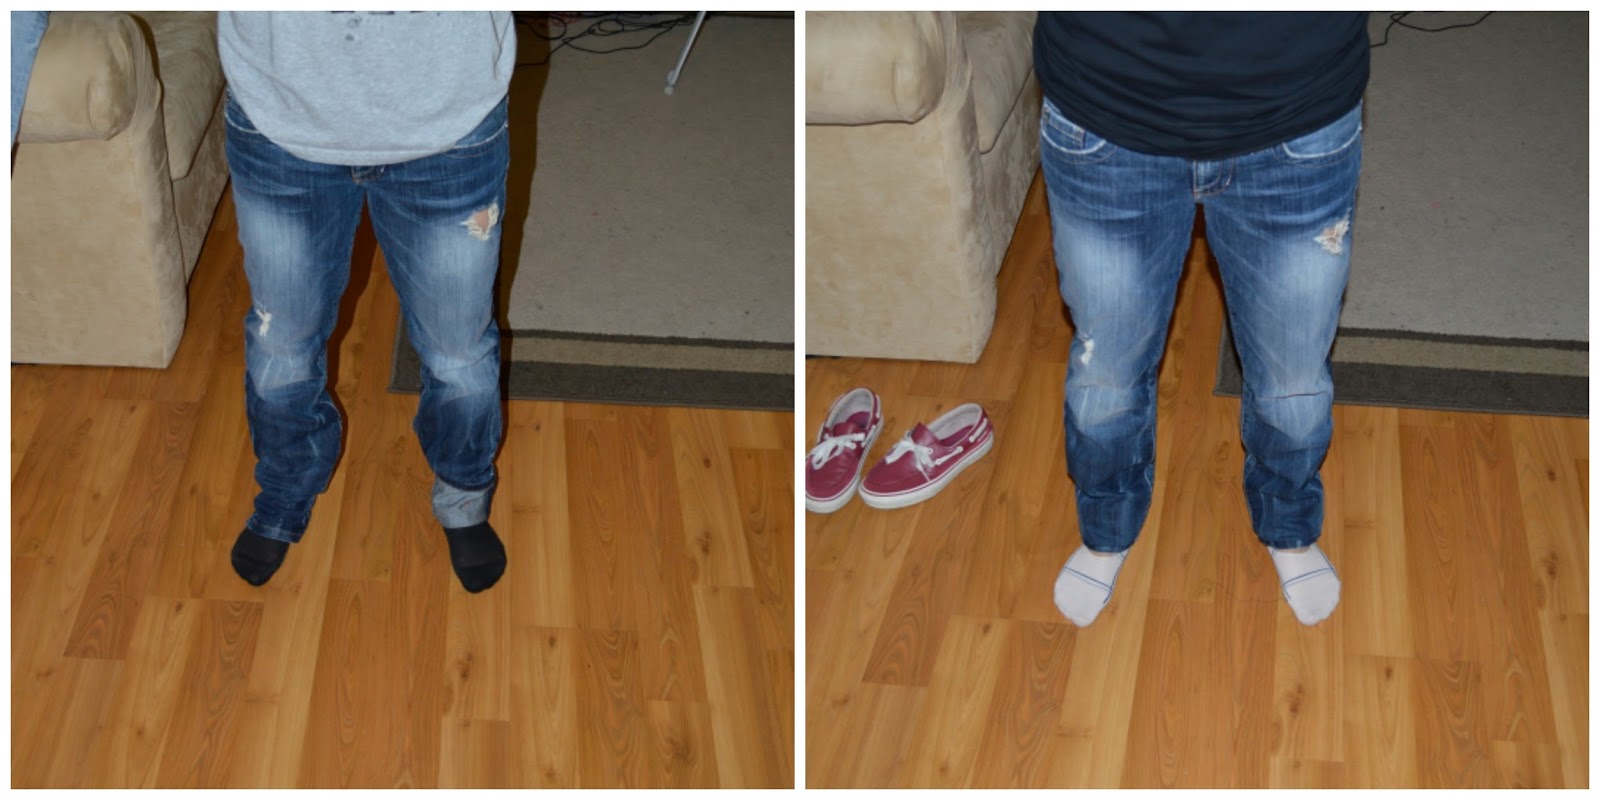 Here are some before and after views of one of the pairs.